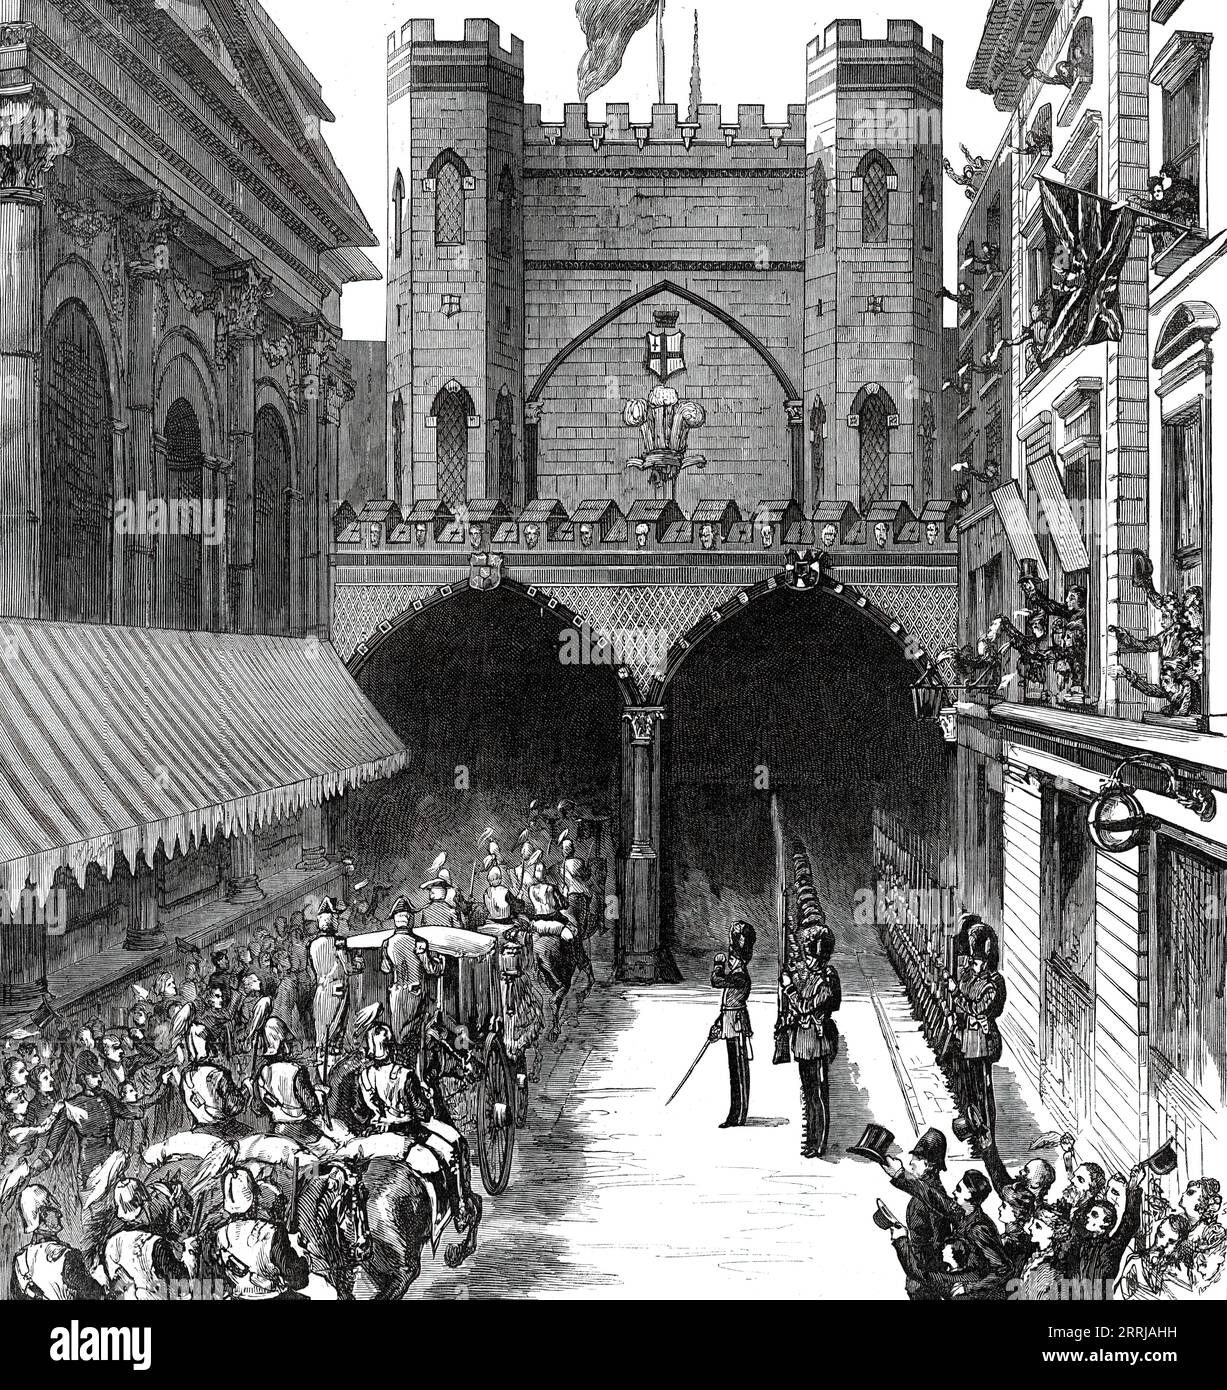 The Royal Visit to the City: Arrival of the Prince and Princess of Wales at Guildhall Yard, 1876. The future King Edward VII and Queen Alexandra during a visit to the City of London. '...on their arrival at Guildhall, [they] were received by a deputation composed of Mr. Isaacs, Chairman of the Entertainment Committee, six of the members of the Court of Aldermen, and ten of the Court of Common Council...'. From &quot;Illustrated London News&quot;, 1876. Stock Photo